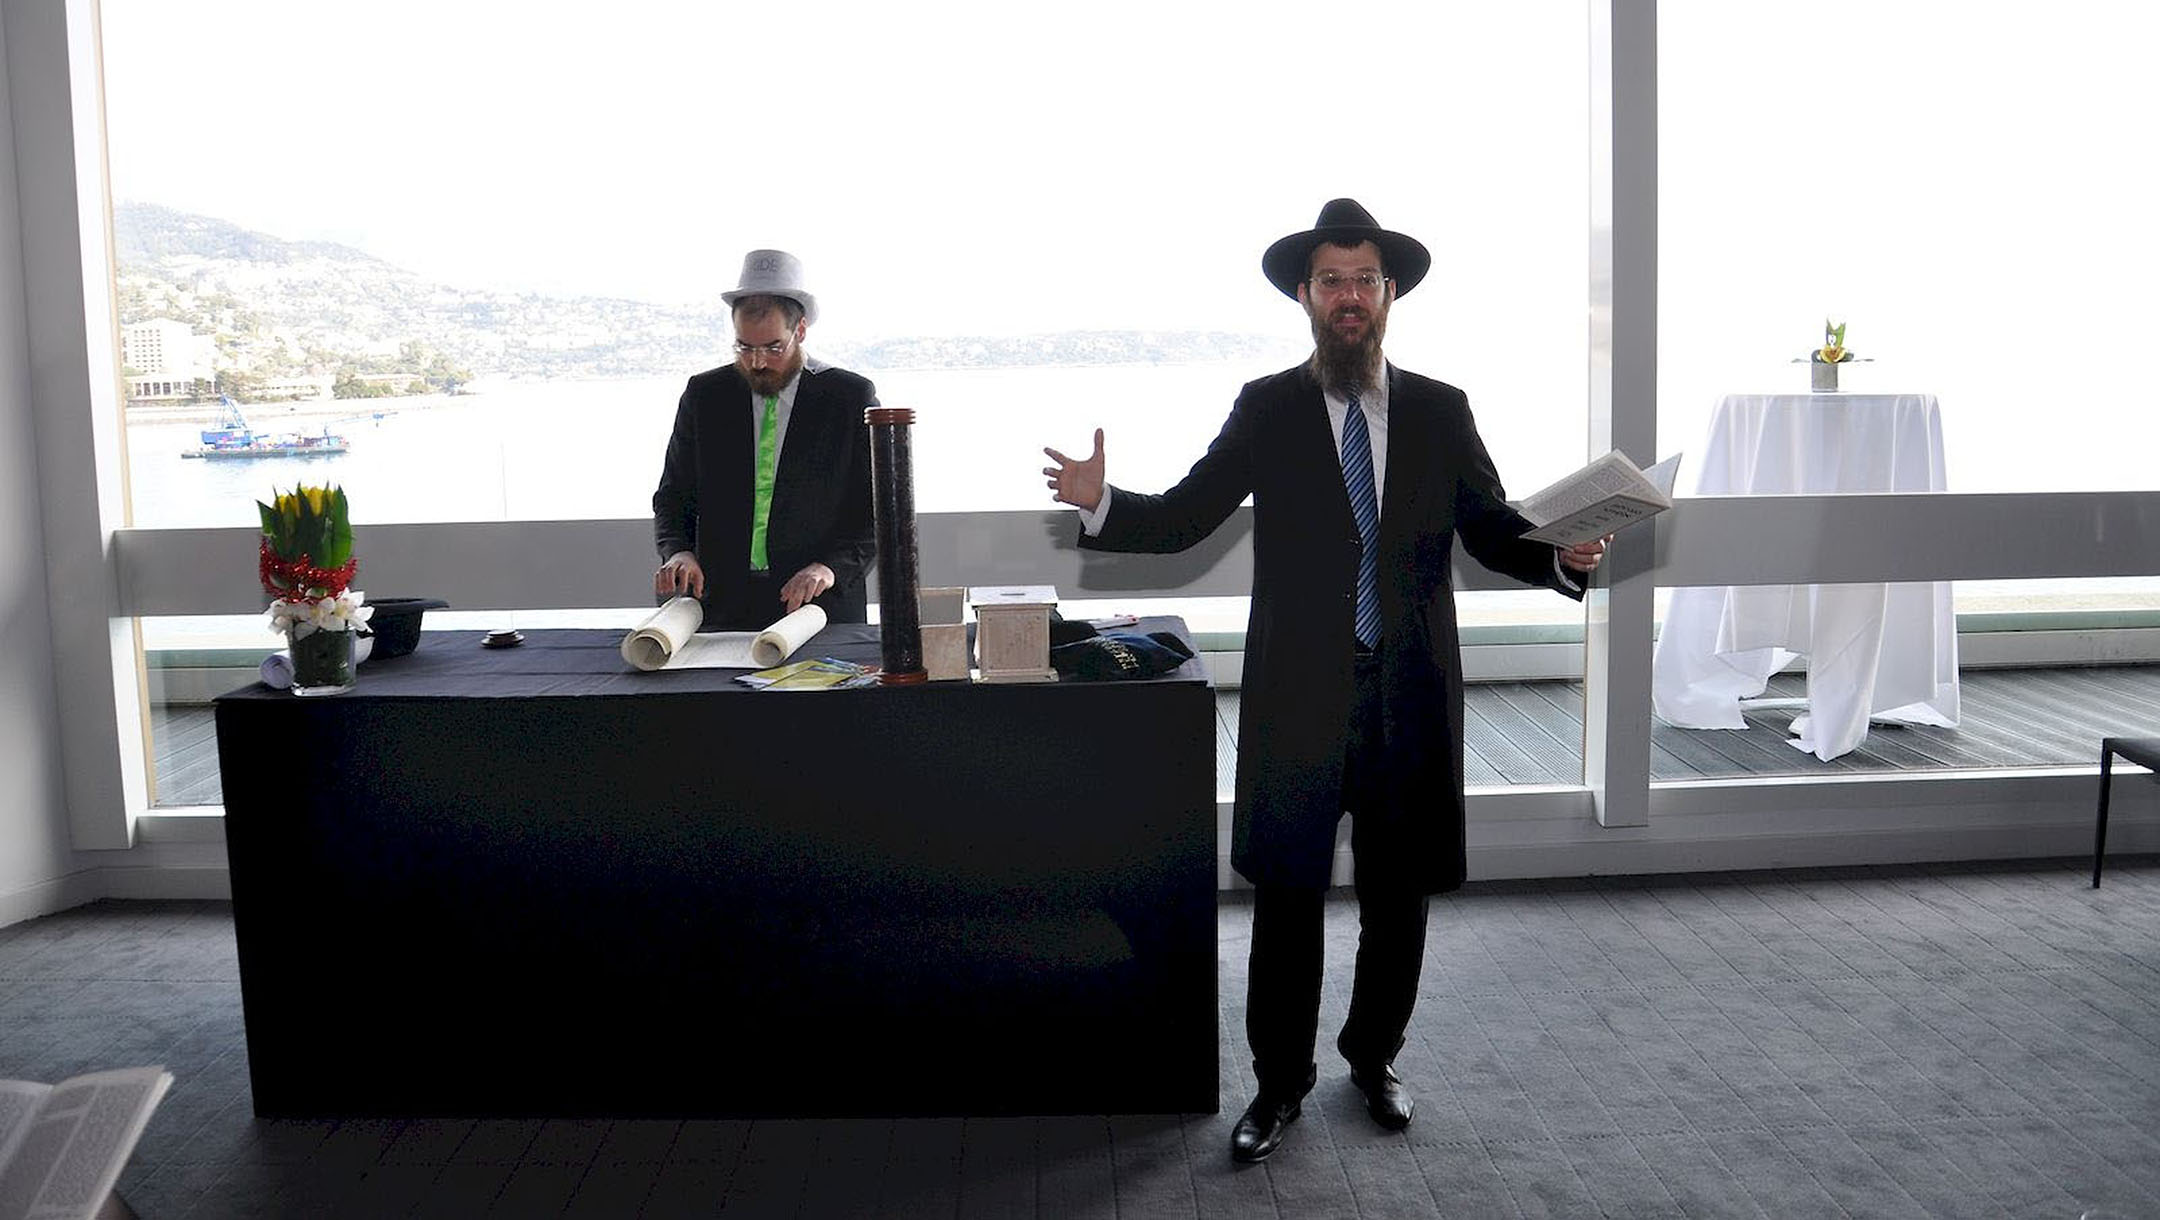 Rabbi Tanhoum Matusof reads from the Book of Esther on Purim in Monaco on Feb. 28, 2018. (Courtesy of the Jewish Cultural Center of Monaco)